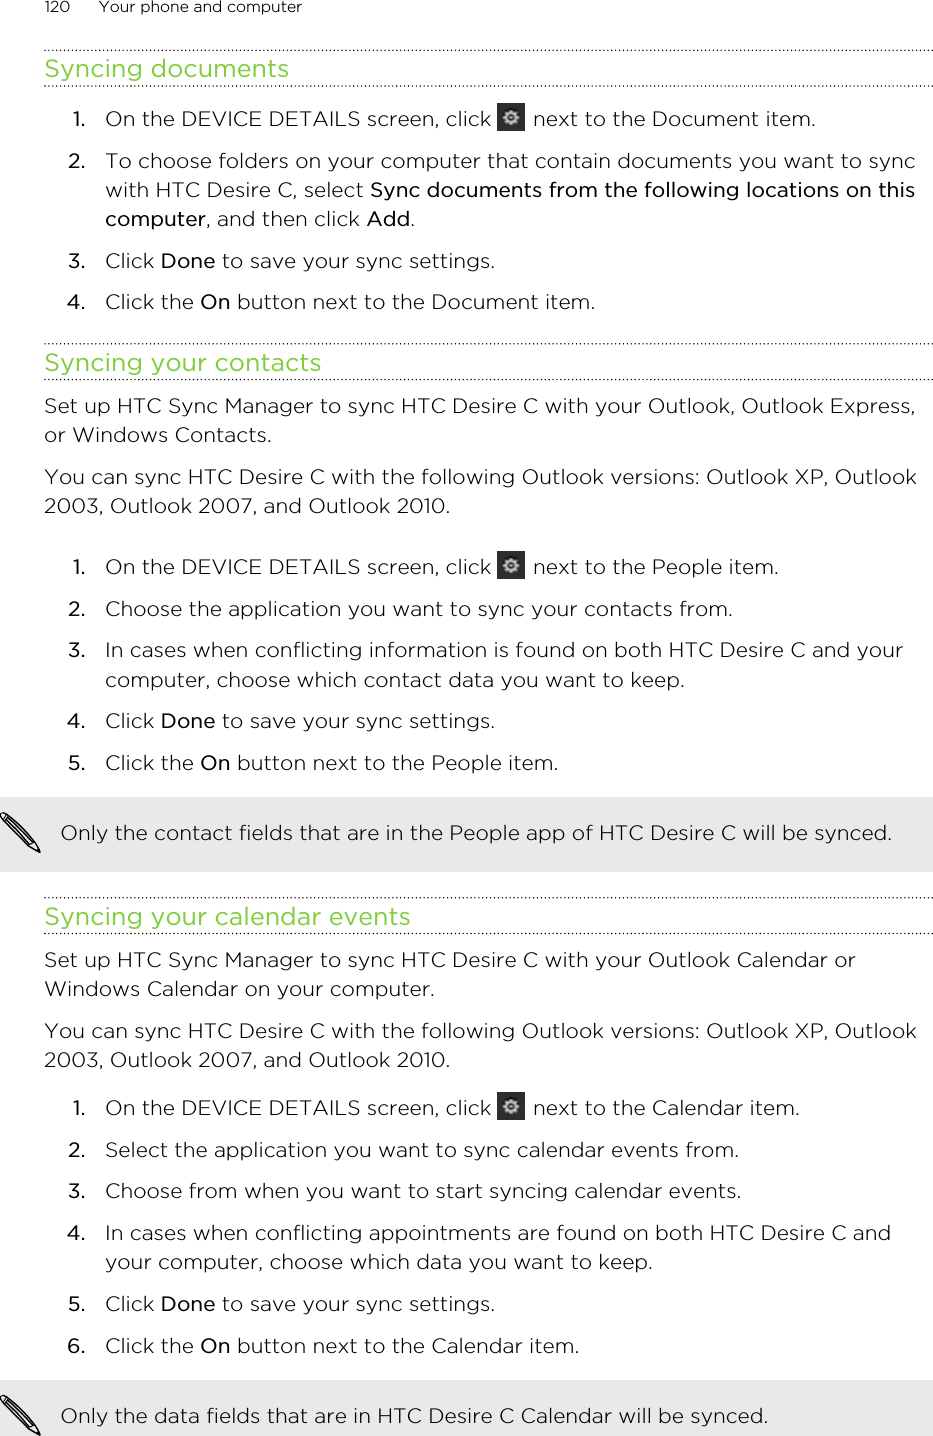 Syncing documents1. On the DEVICE DETAILS screen, click   next to the Document item.2. To choose folders on your computer that contain documents you want to syncwith HTC Desire C, select Sync documents from the following locations on thiscomputer, and then click Add.3. Click Done to save your sync settings.4. Click the On button next to the Document item.Syncing your contactsSet up HTC Sync Manager to sync HTC Desire C with your Outlook, Outlook Express,or Windows Contacts.You can sync HTC Desire C with the following Outlook versions: Outlook XP, Outlook2003, Outlook 2007, and Outlook 2010.1. On the DEVICE DETAILS screen, click   next to the People item.2. Choose the application you want to sync your contacts from.3. In cases when conflicting information is found on both HTC Desire C and yourcomputer, choose which contact data you want to keep.4. Click Done to save your sync settings.5. Click the On button next to the People item.Only the contact fields that are in the People app of HTC Desire C will be synced.Syncing your calendar eventsSet up HTC Sync Manager to sync HTC Desire C with your Outlook Calendar orWindows Calendar on your computer.You can sync HTC Desire C with the following Outlook versions: Outlook XP, Outlook2003, Outlook 2007, and Outlook 2010.1. On the DEVICE DETAILS screen, click   next to the Calendar item.2. Select the application you want to sync calendar events from.3. Choose from when you want to start syncing calendar events.4. In cases when conflicting appointments are found on both HTC Desire C andyour computer, choose which data you want to keep.5. Click Done to save your sync settings.6. Click the On button next to the Calendar item.Only the data fields that are in HTC Desire C Calendar will be synced.120 Your phone and computer